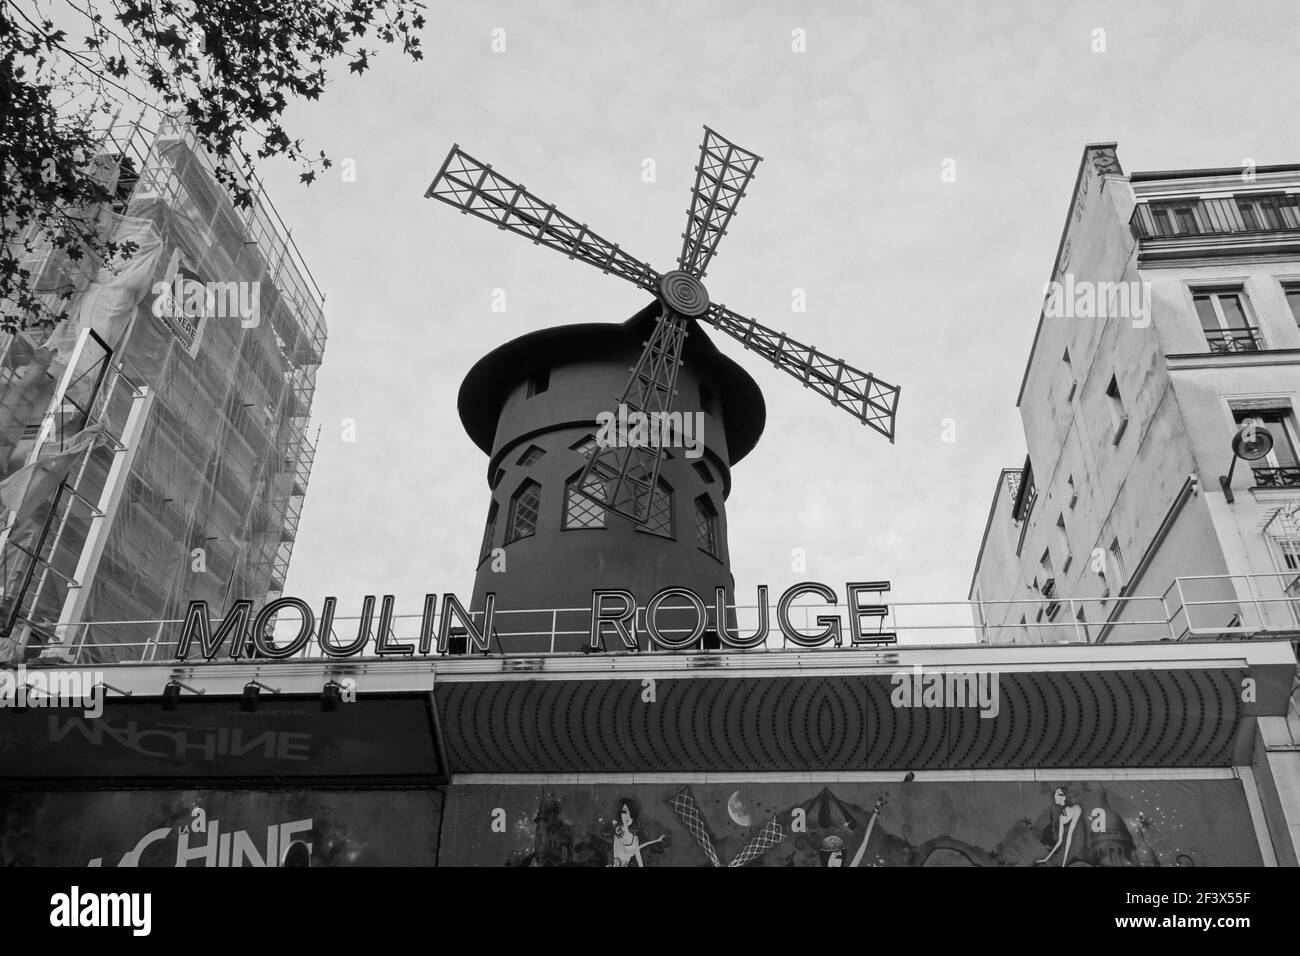 Paris, France - November 27, 2013 :The world famous cabaret of Moulin rouge on Paris France in black and white Stock Photo